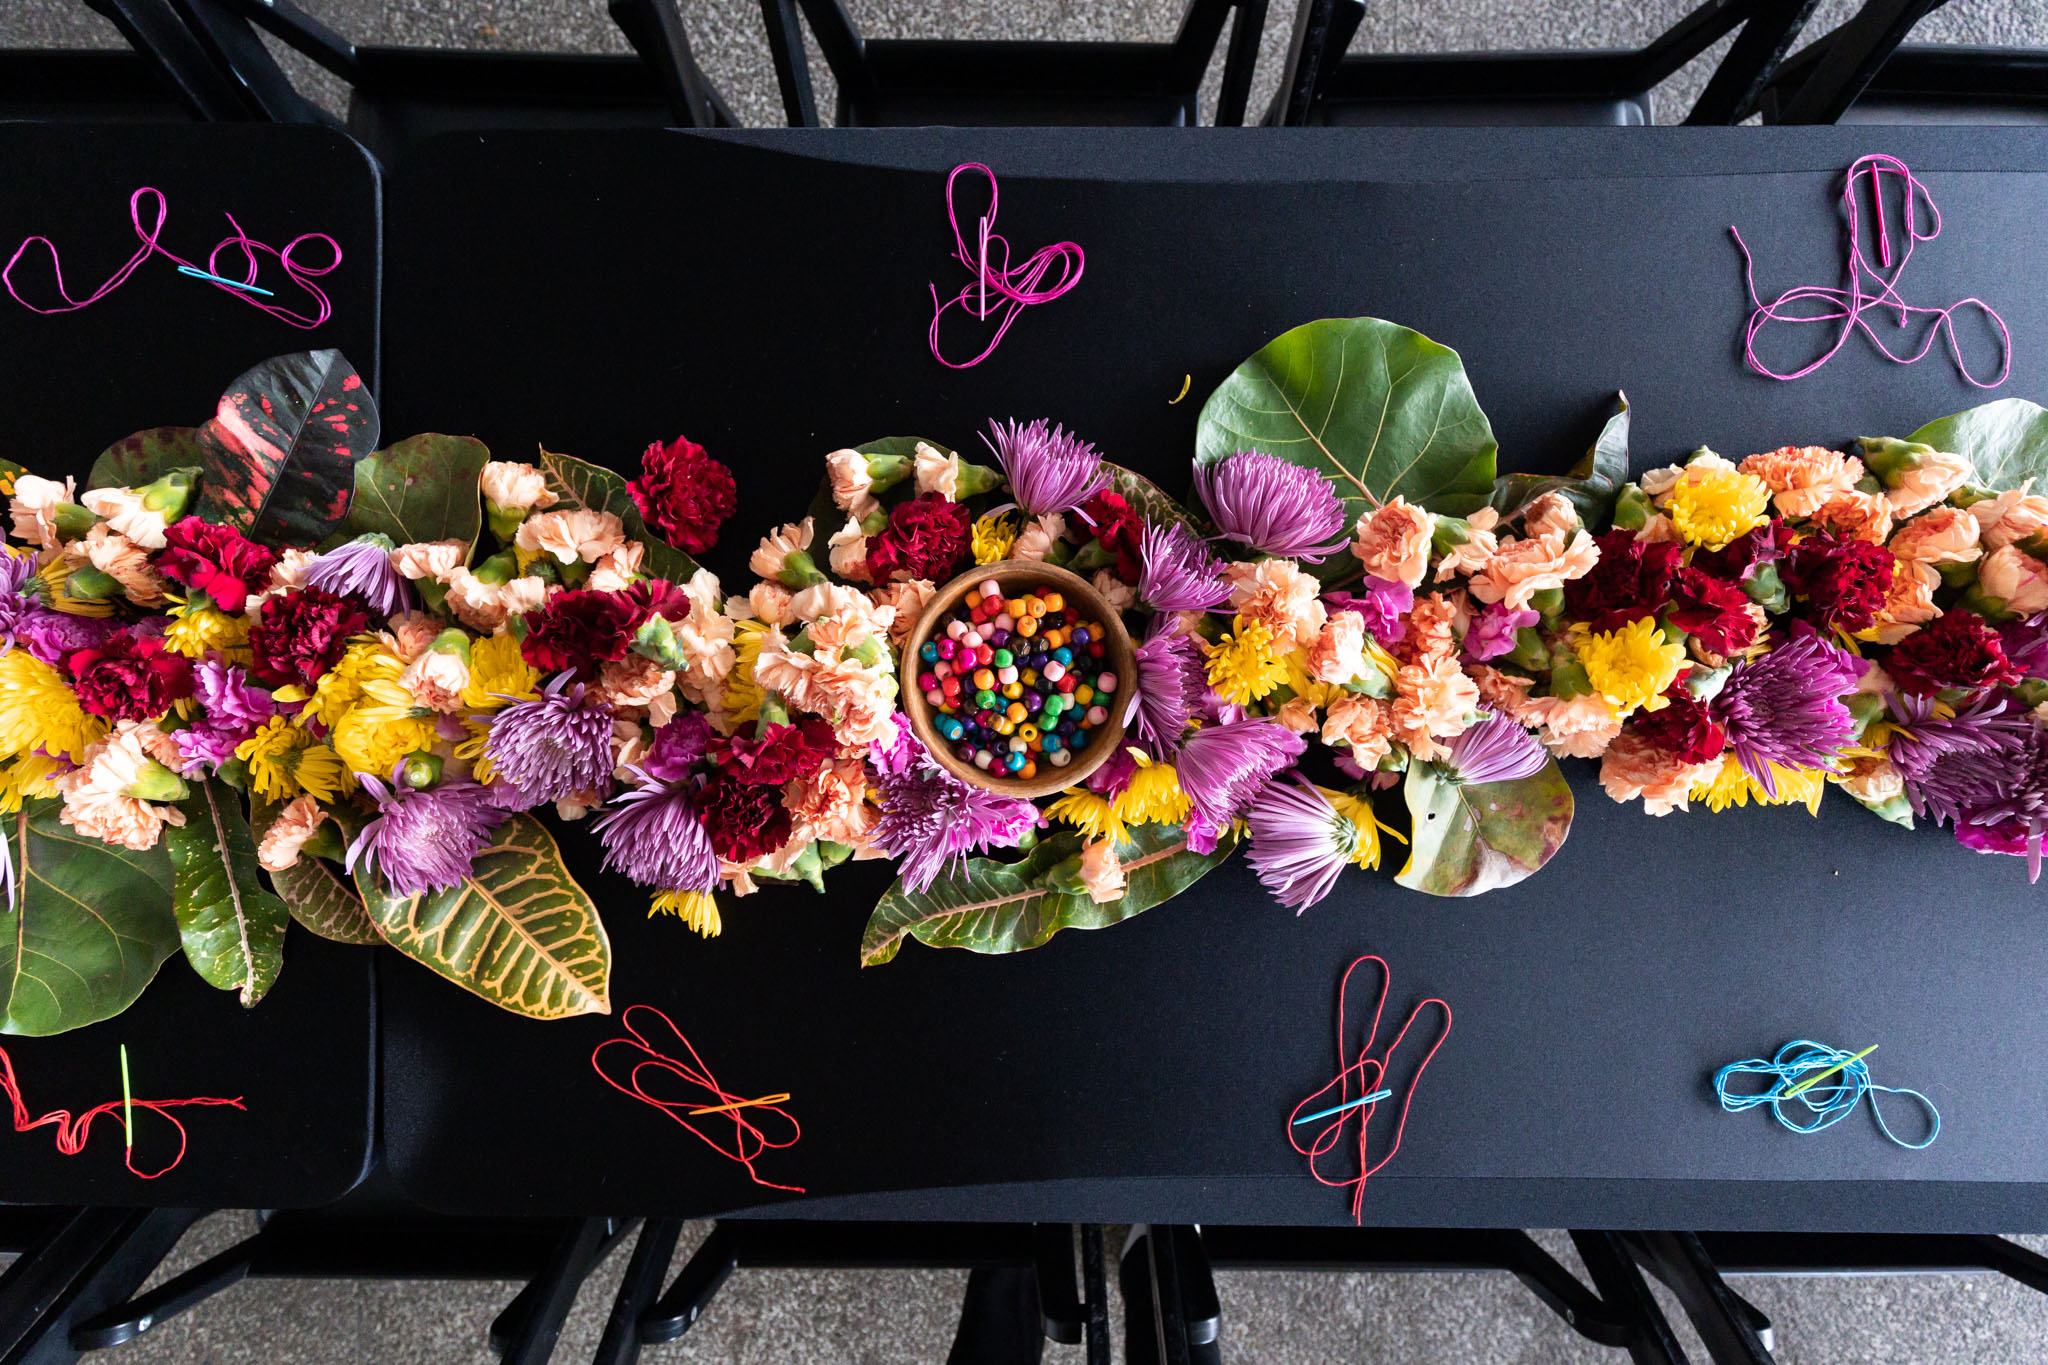 Florals and beads for creating floral lays